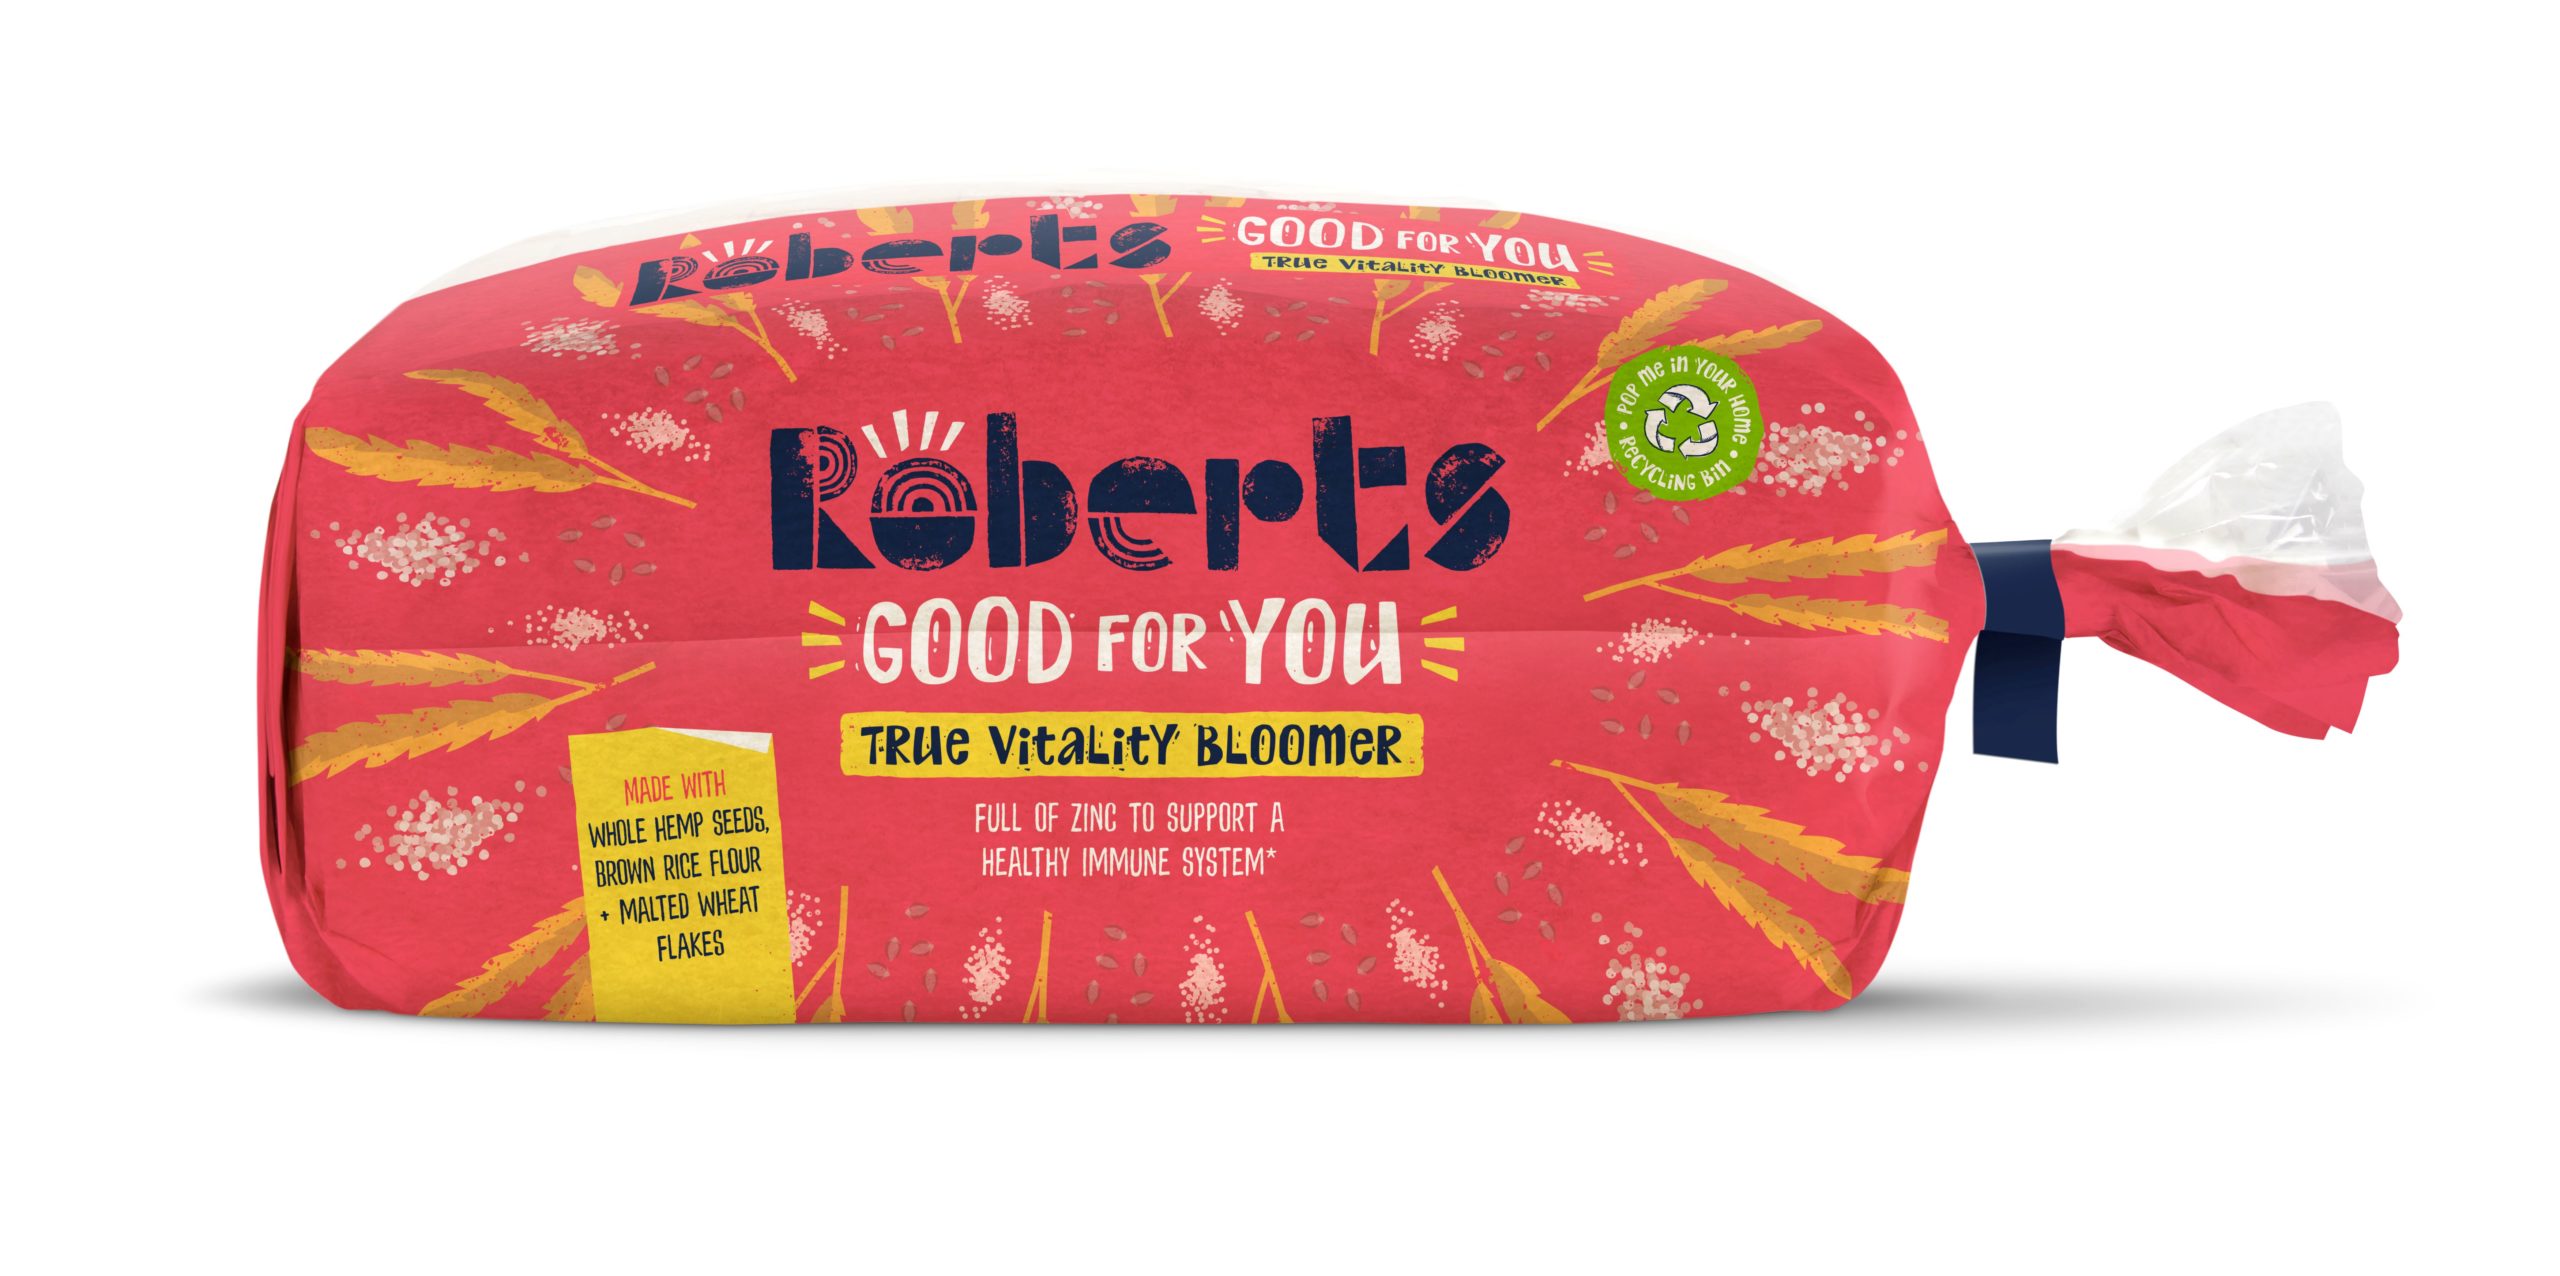 Roberts Good for you Bloomer_True Vitality